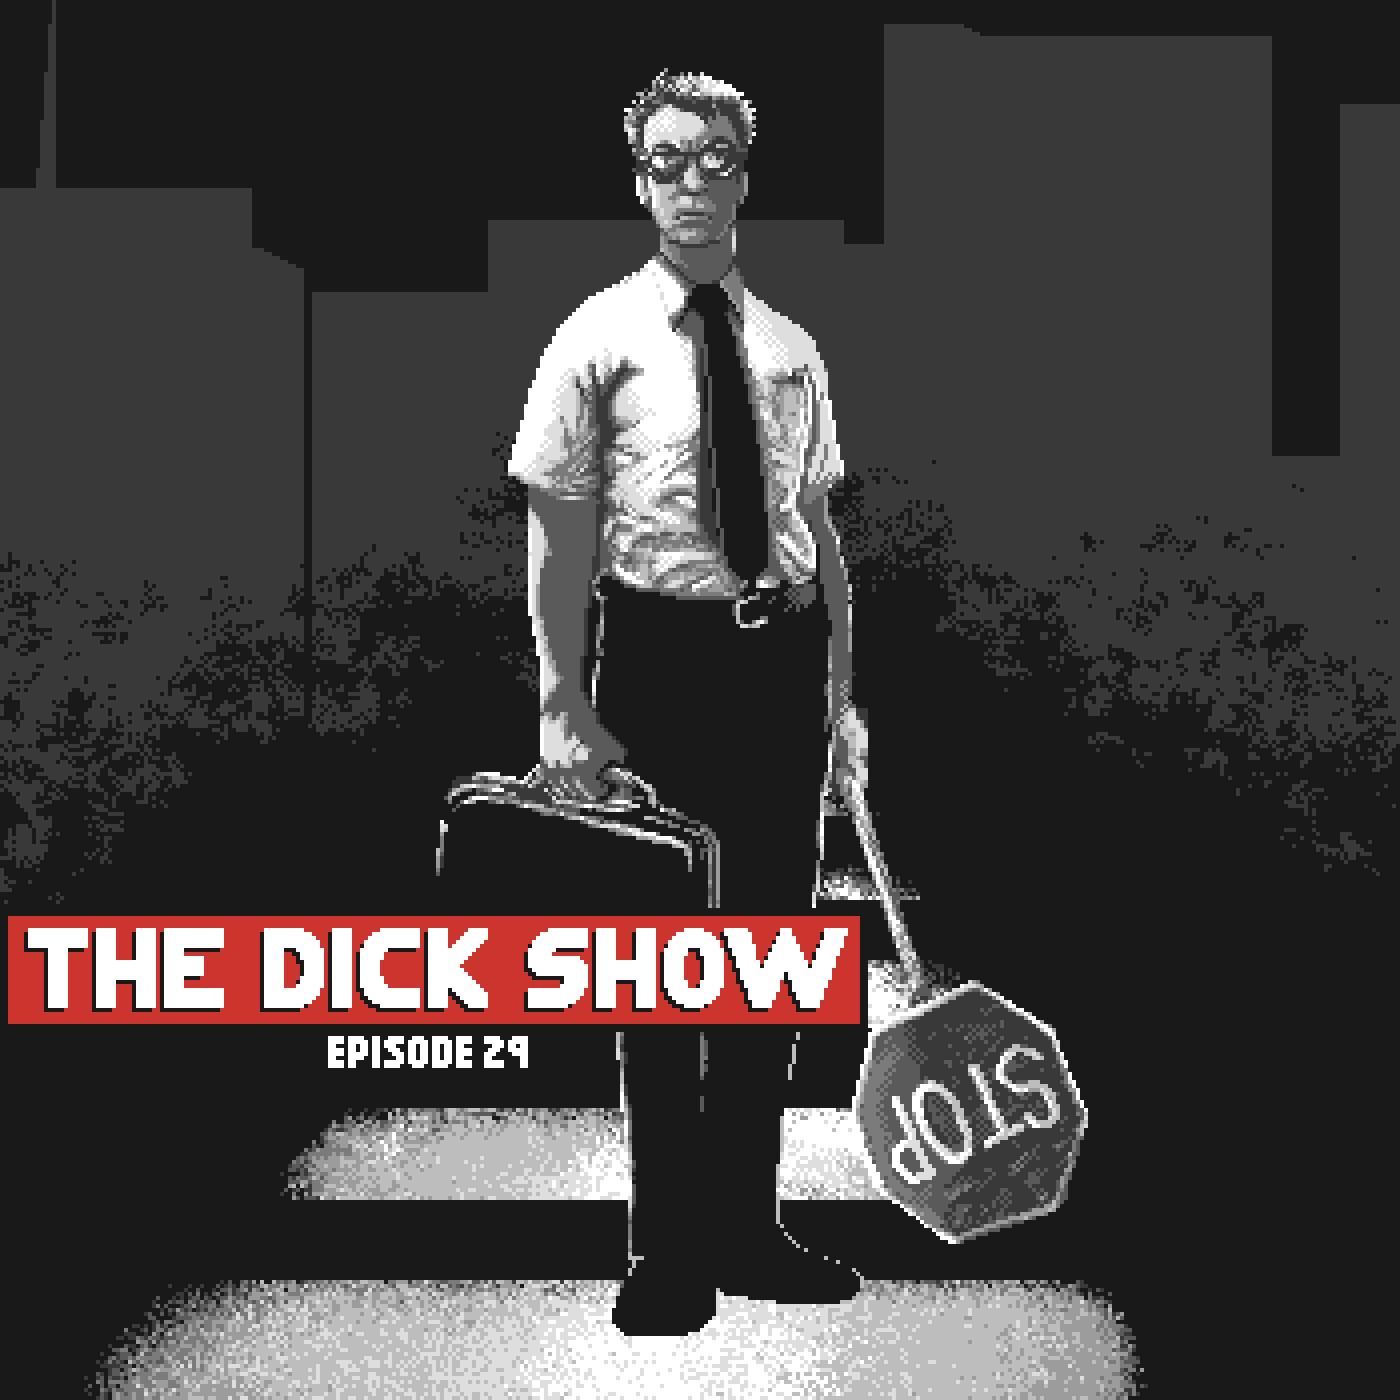 Letters from shawn the dick show